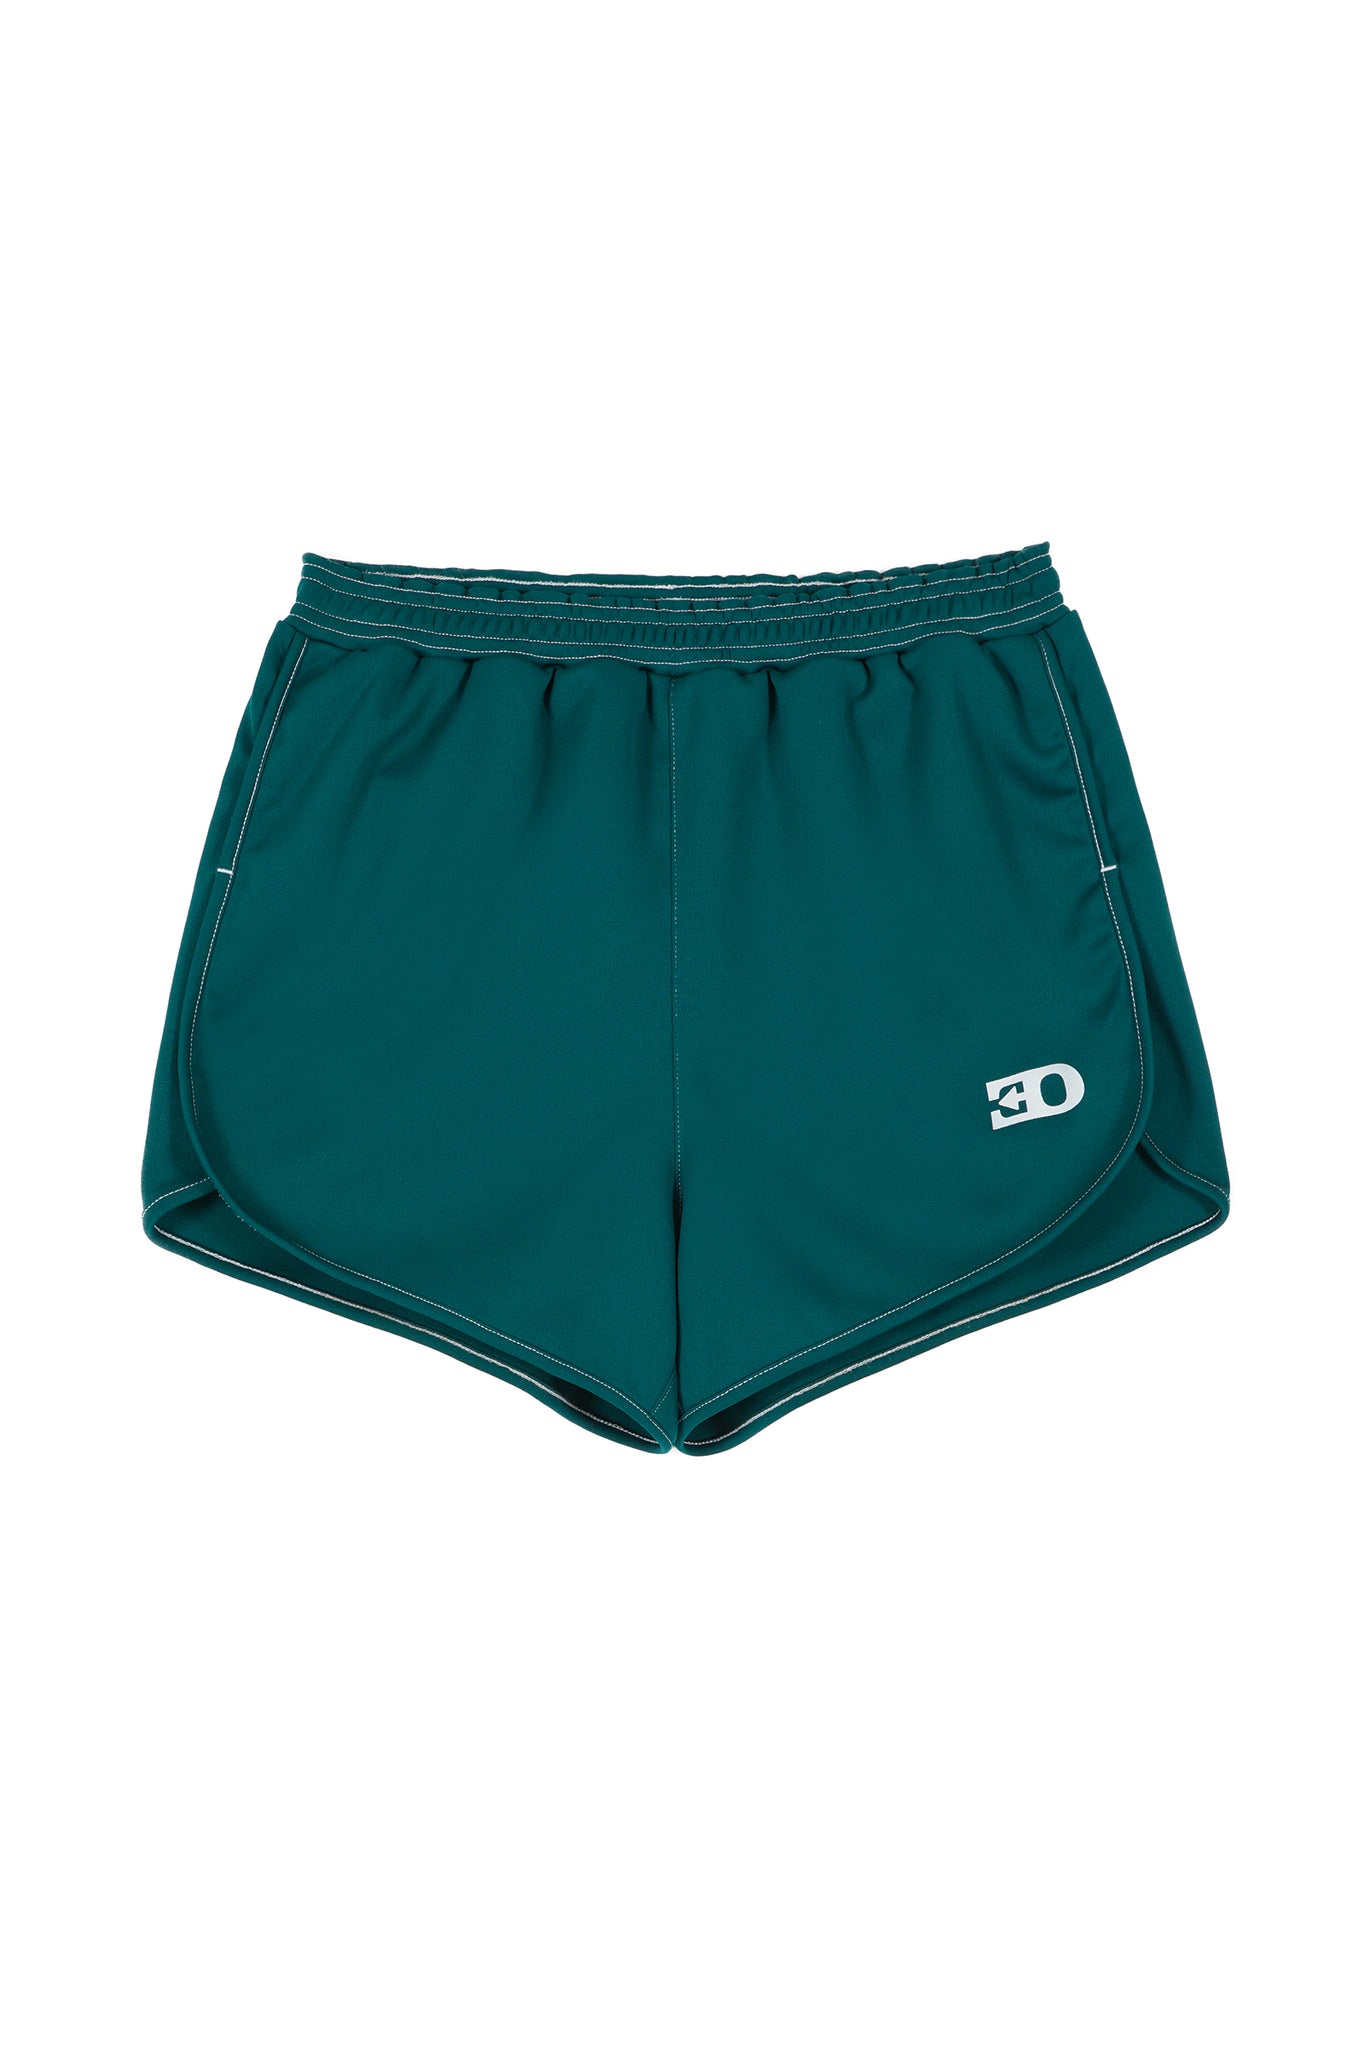 THE 70S TRACK SHORTS IN GREEN